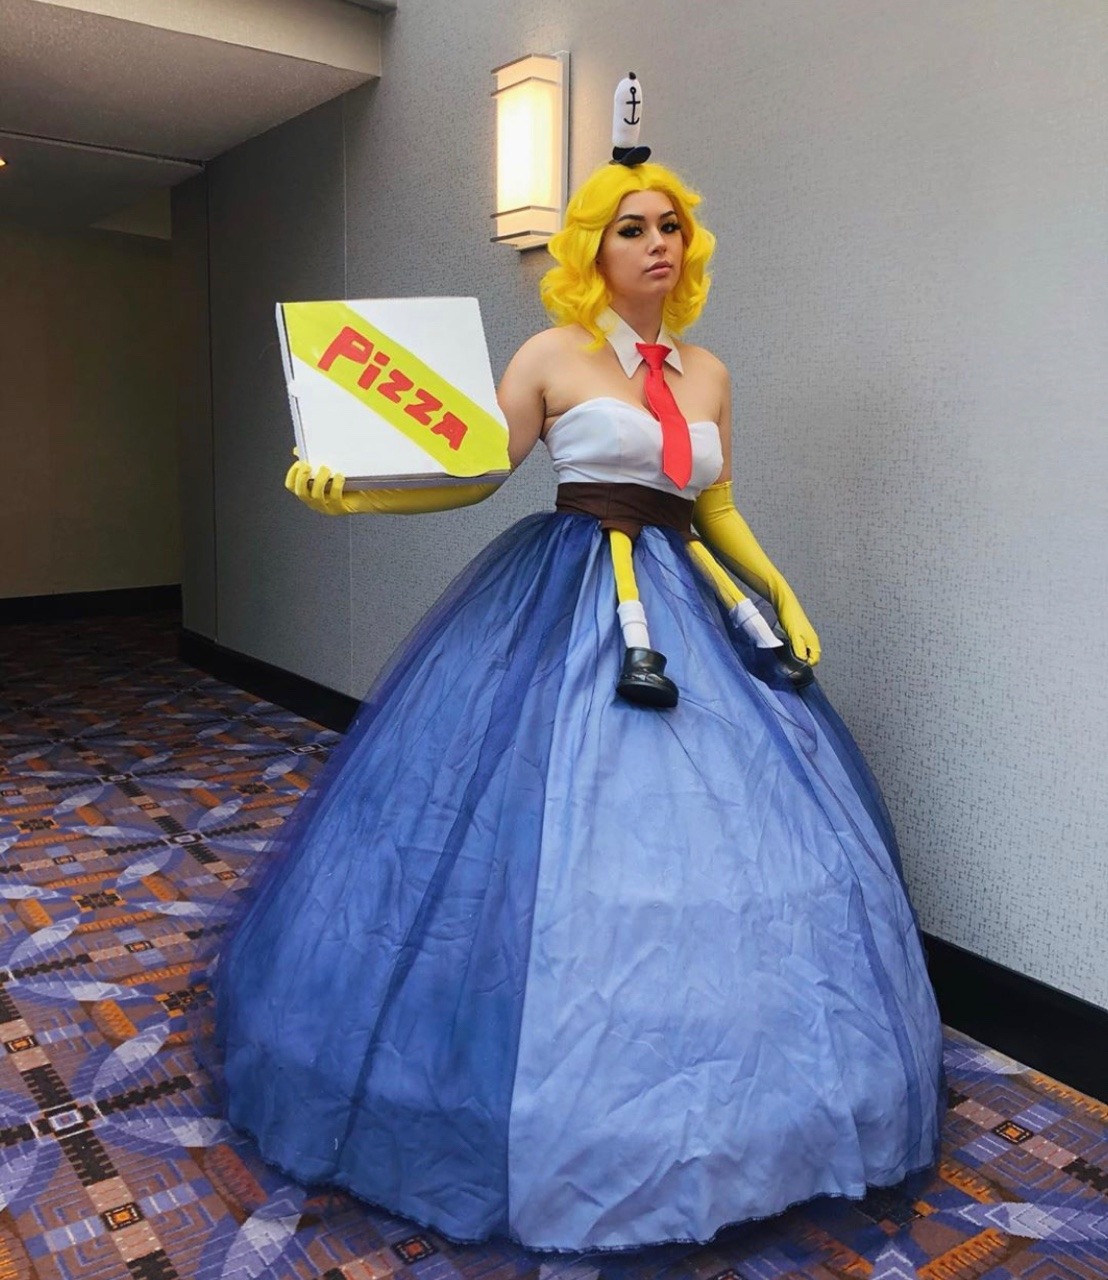 krabby-kronicle:I have no words.. Cosplay porn pictures